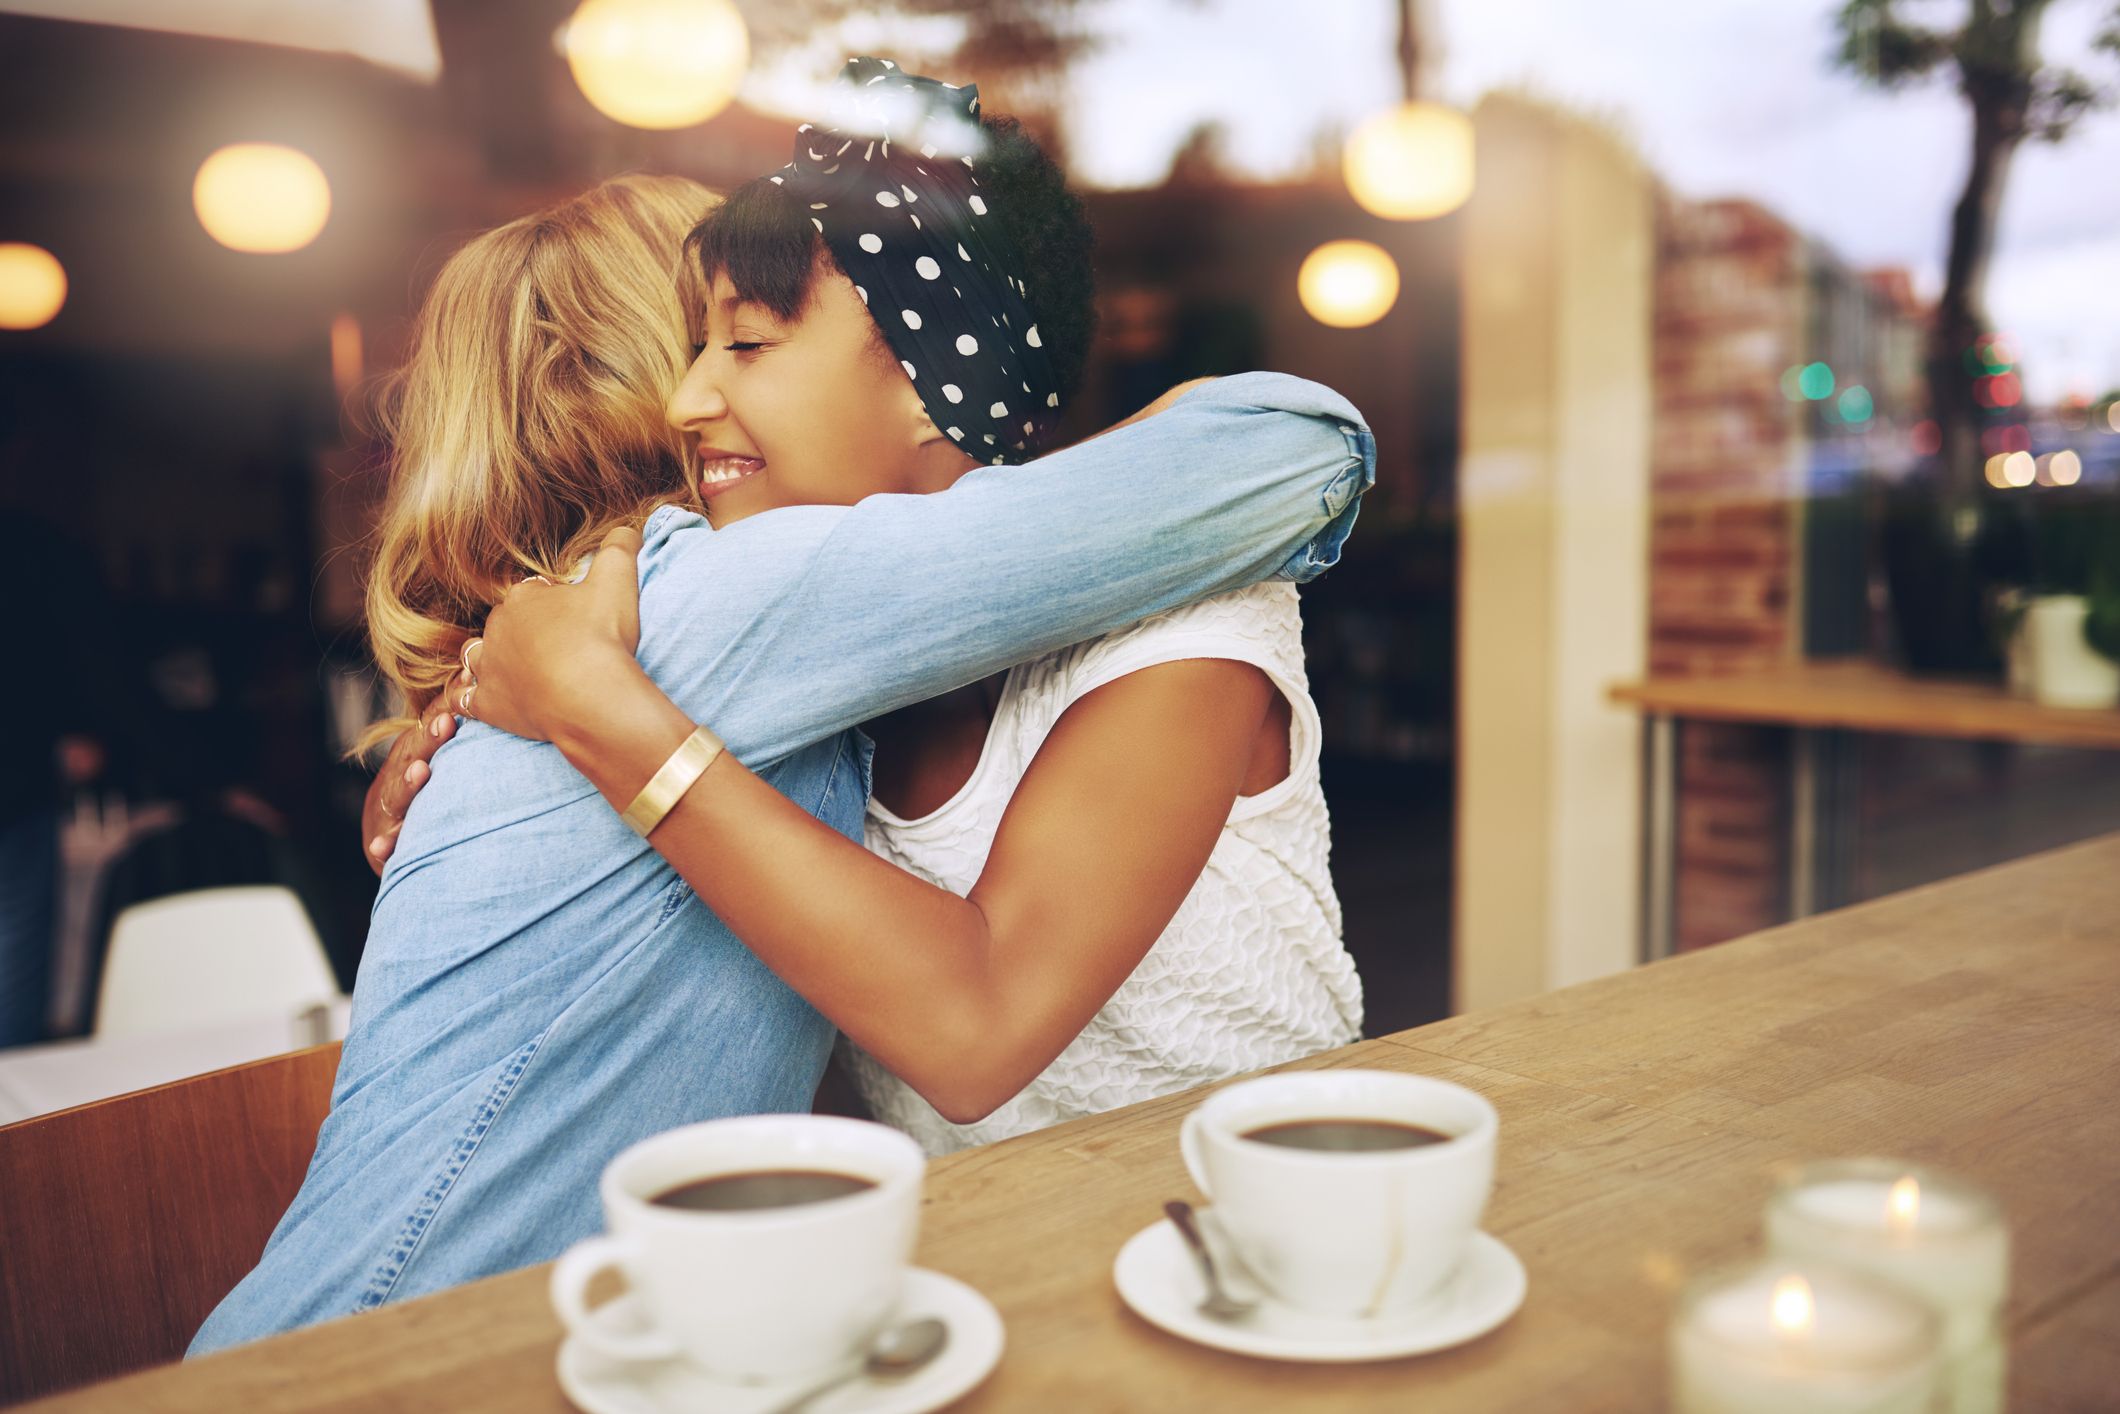 10 Tips for Friends and Family Supporting Someone With IBD 